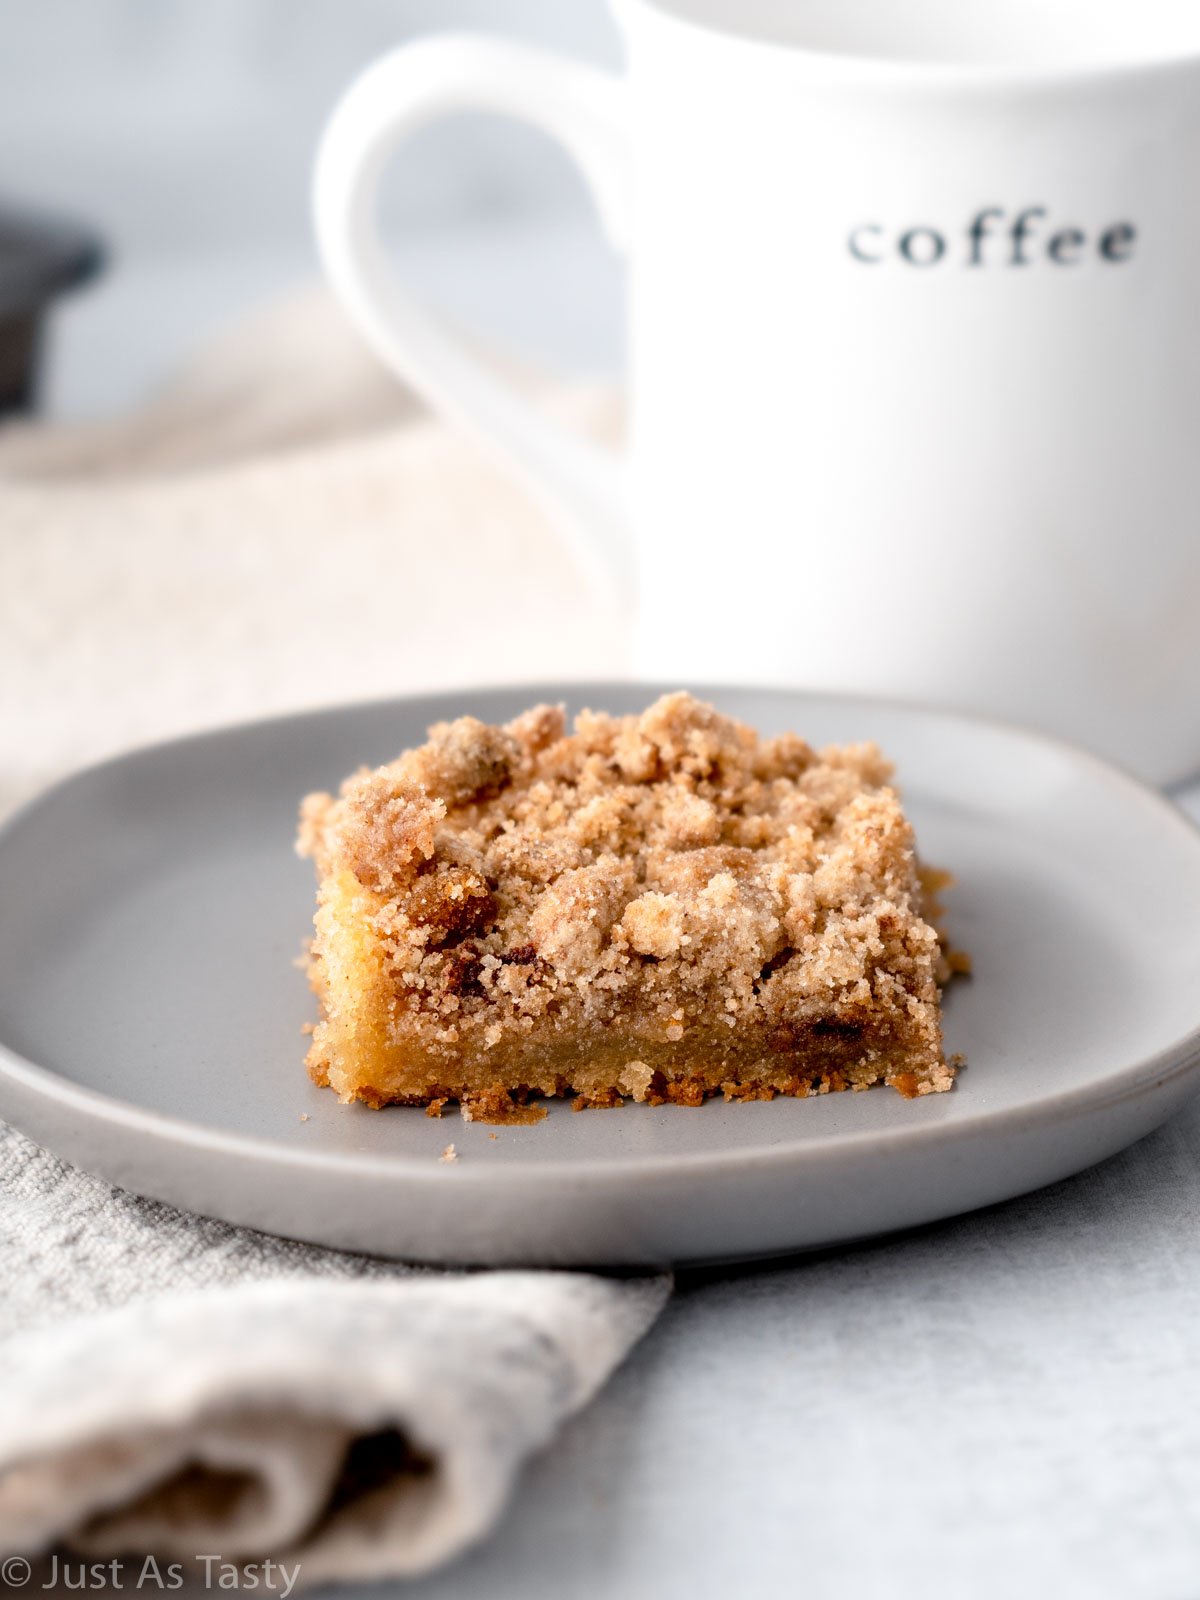 Slice of eggless coffee cake with streusel topping on a grey plate.